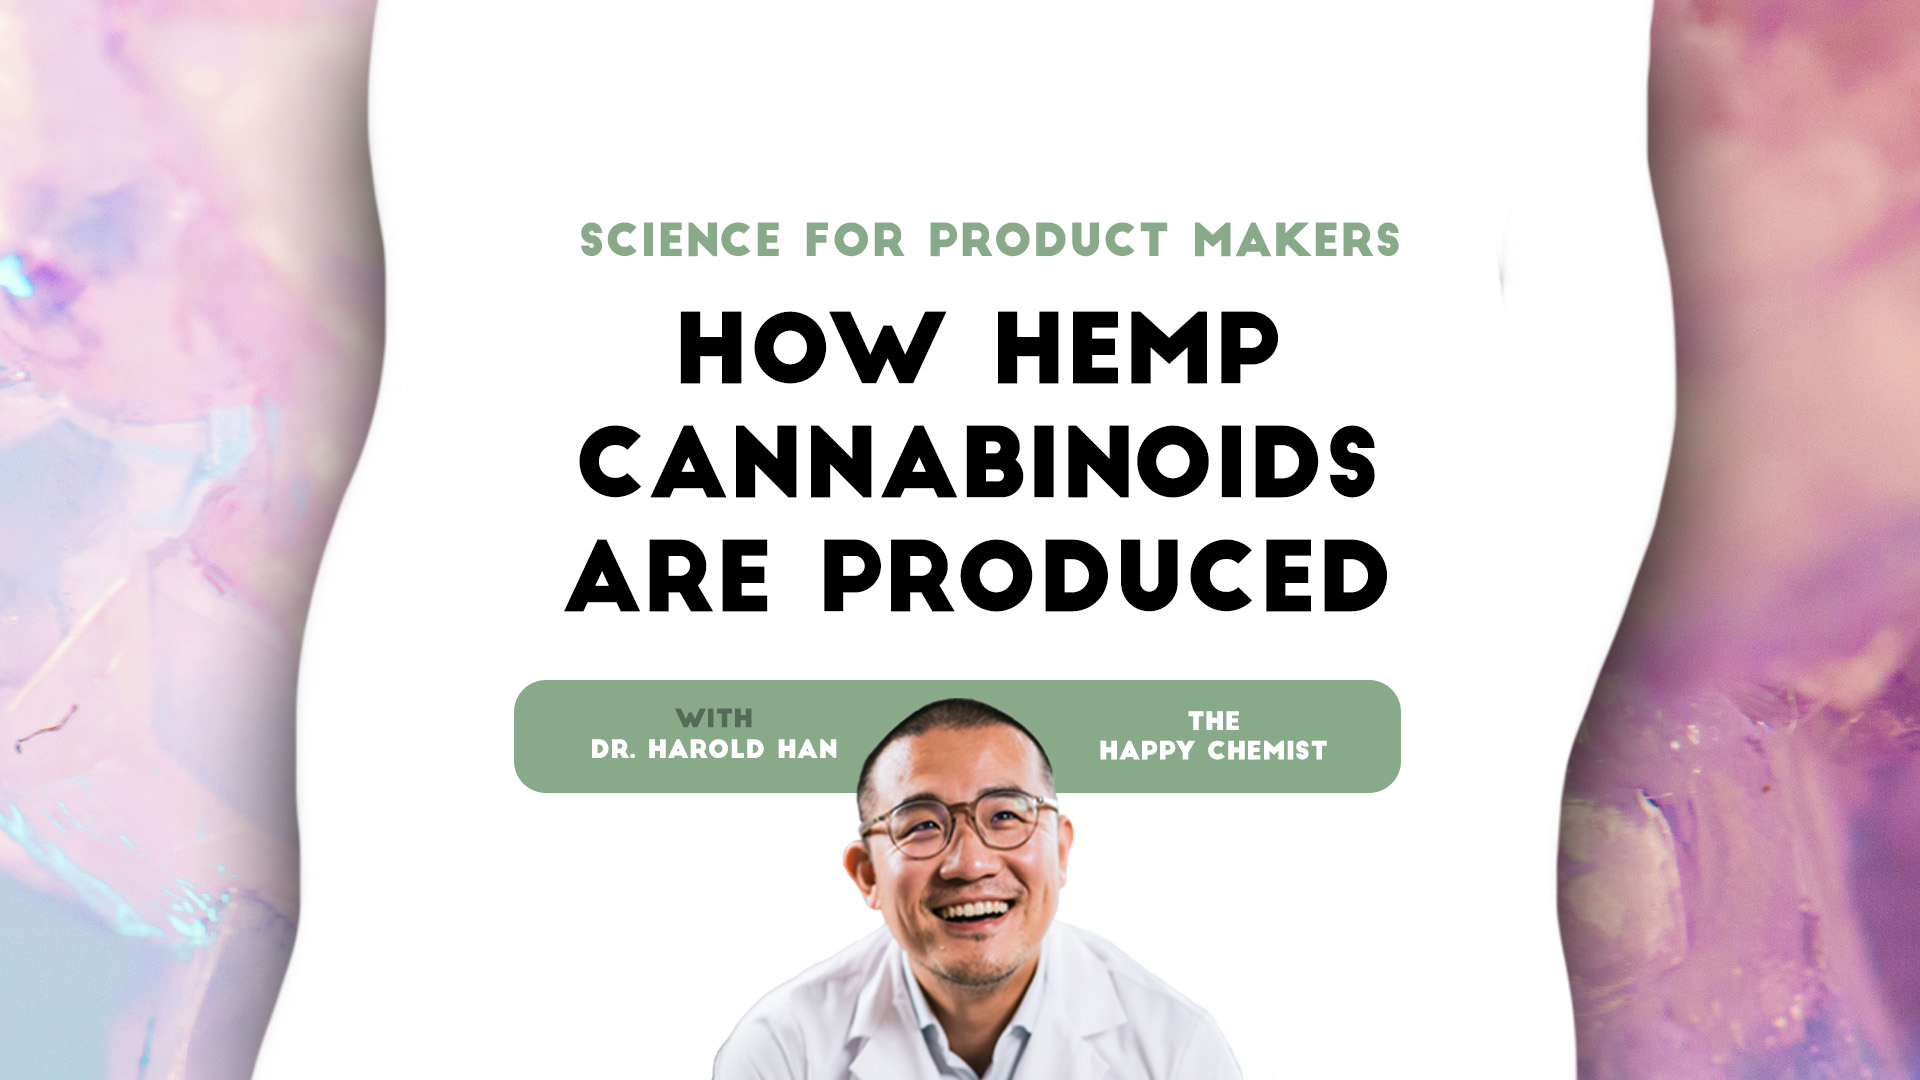 Science for product makers: How hemp cannabinoids are produced